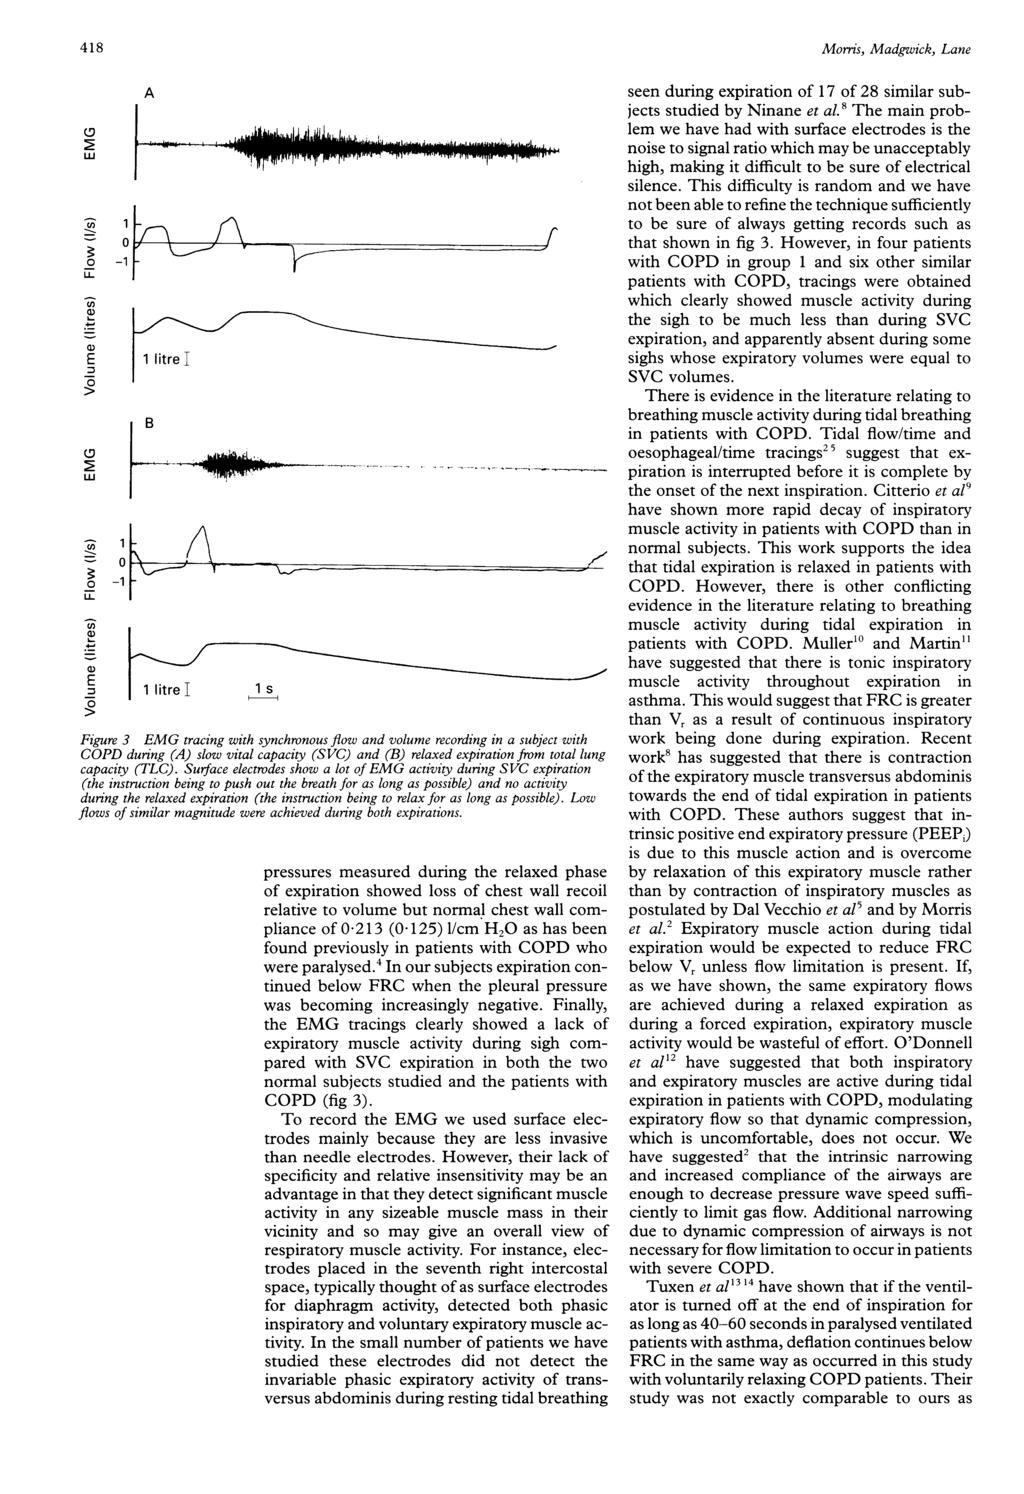 418 (3 LU A I S E 1 litrei g B (3~~~~~~~~~~7 cn -1 E 1 litrei s Figure 3 EMG tracing with synchronous flow and volume recording in a subject with COPD during (A) slow vital capacity (SVC) and (B)